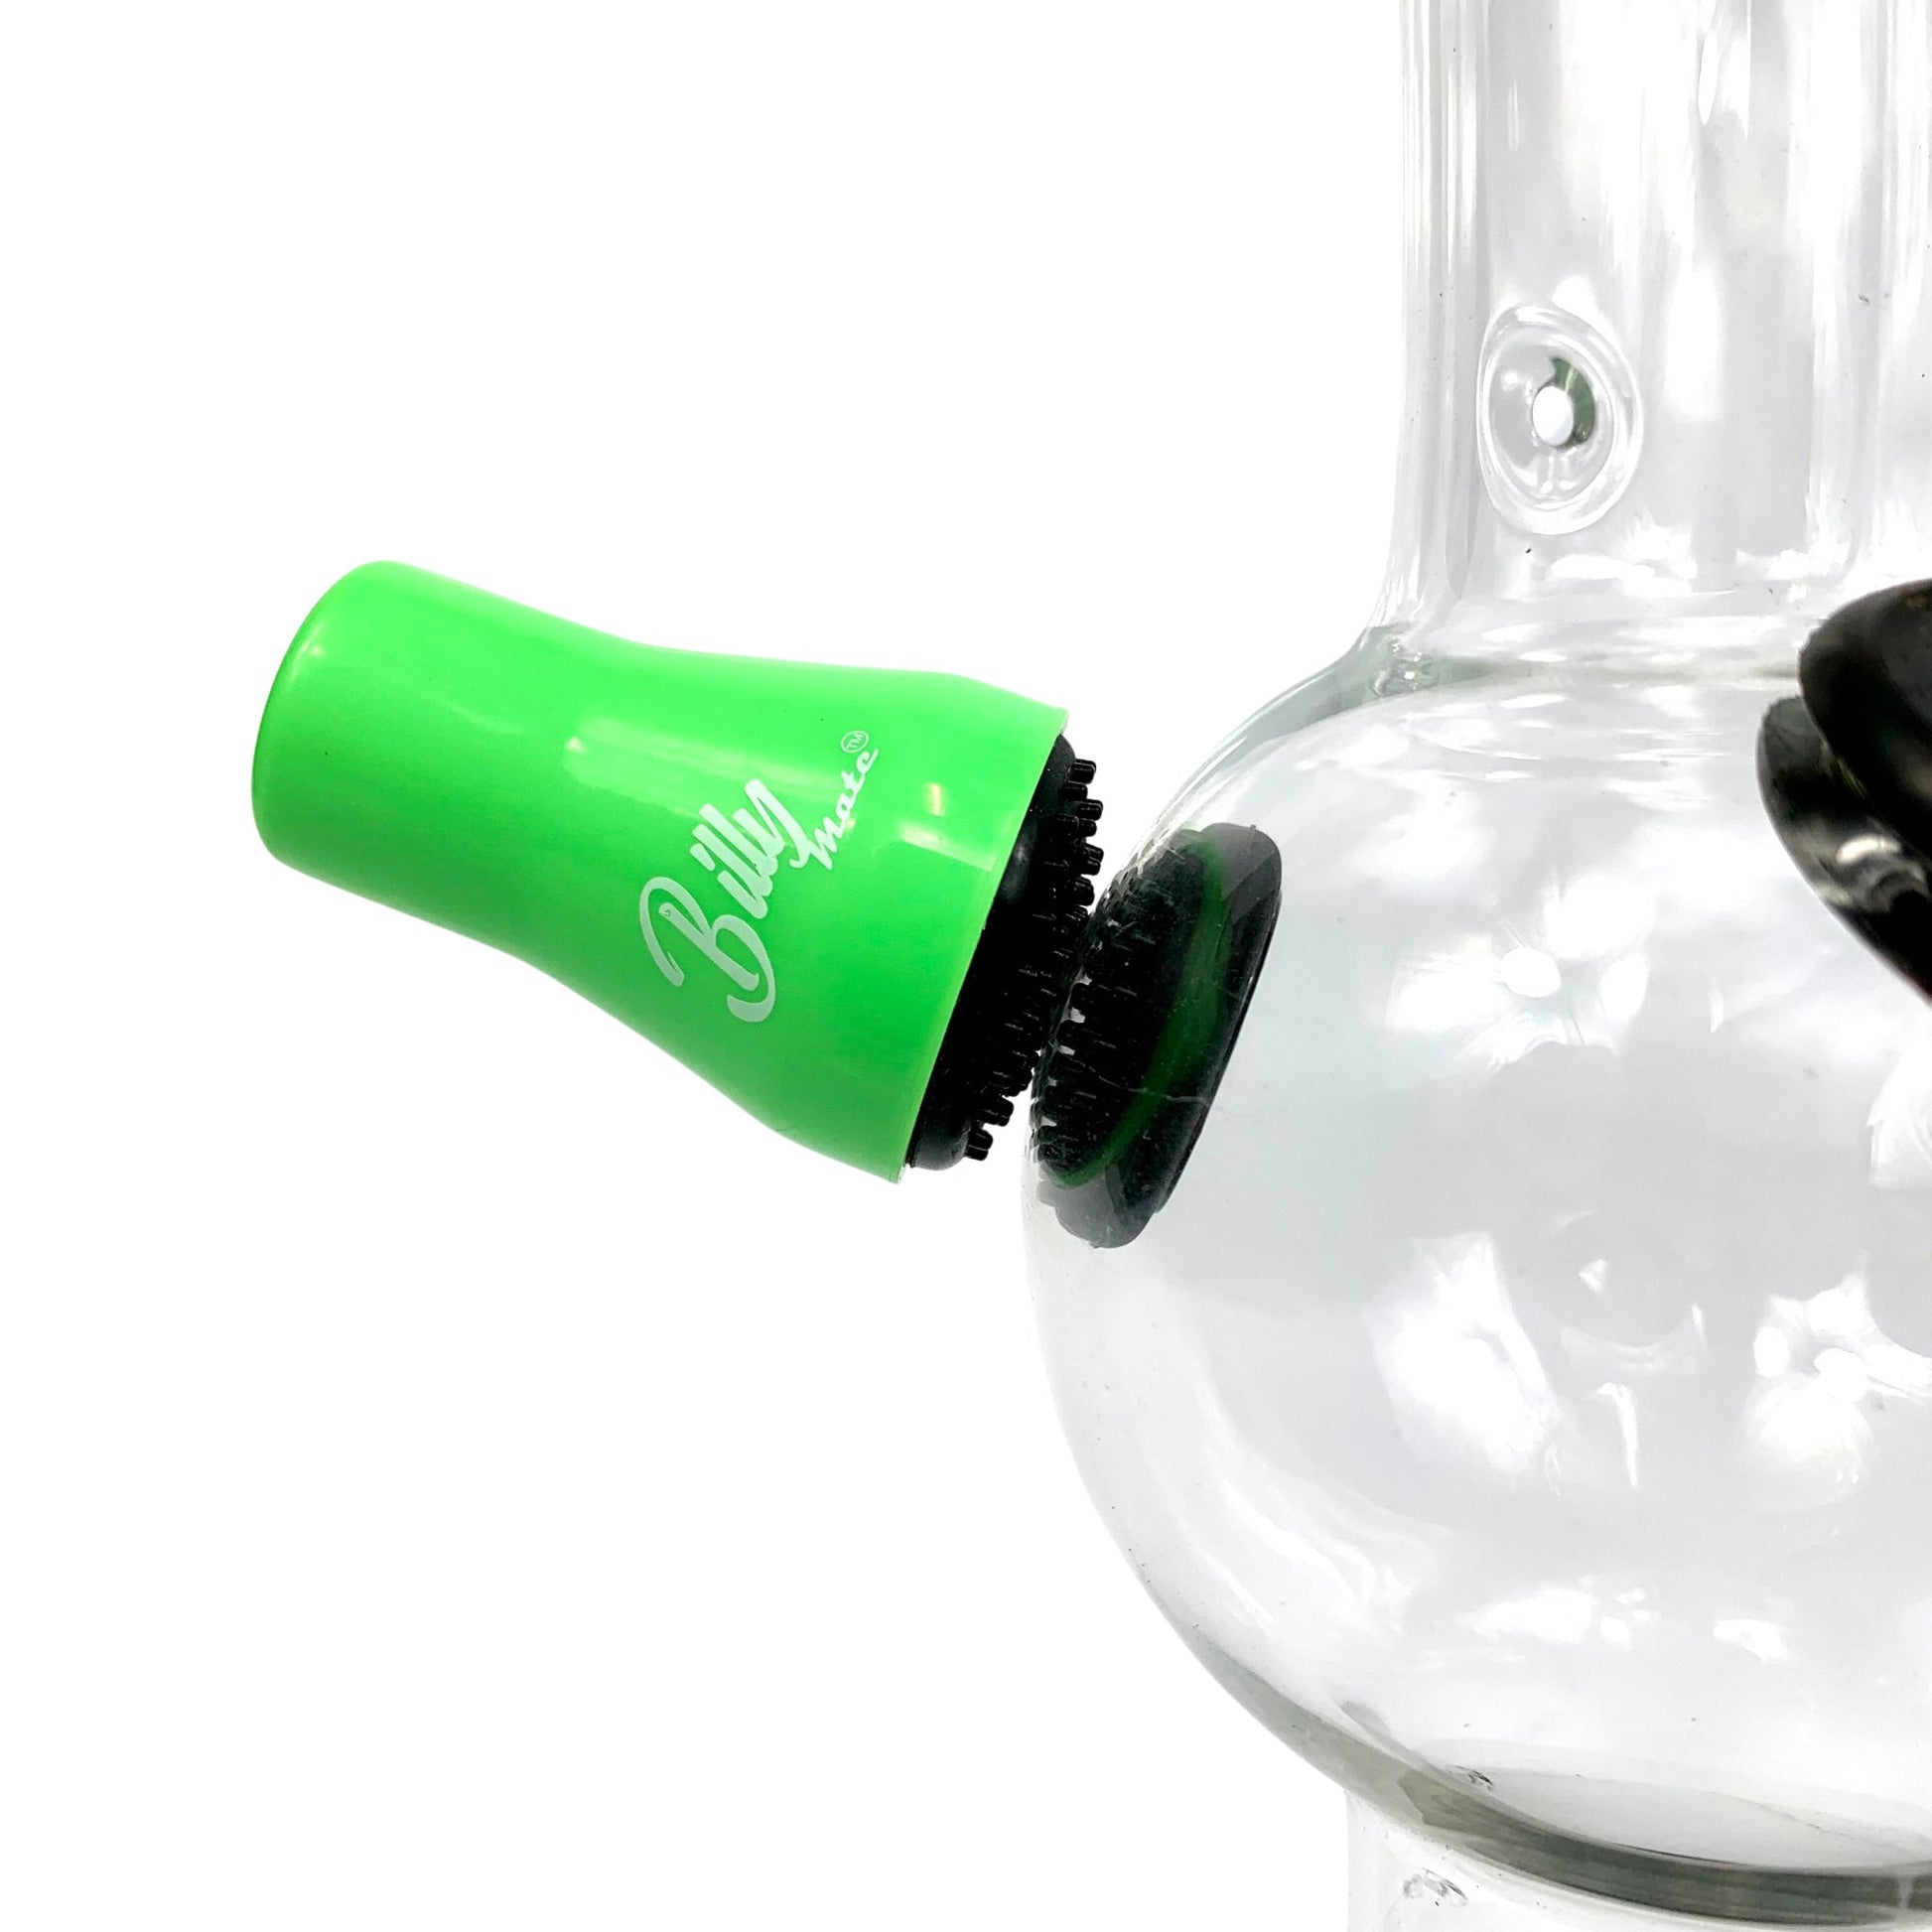 Billy Mate Magnetic Bong Cleaning Brush - The Bong Baron